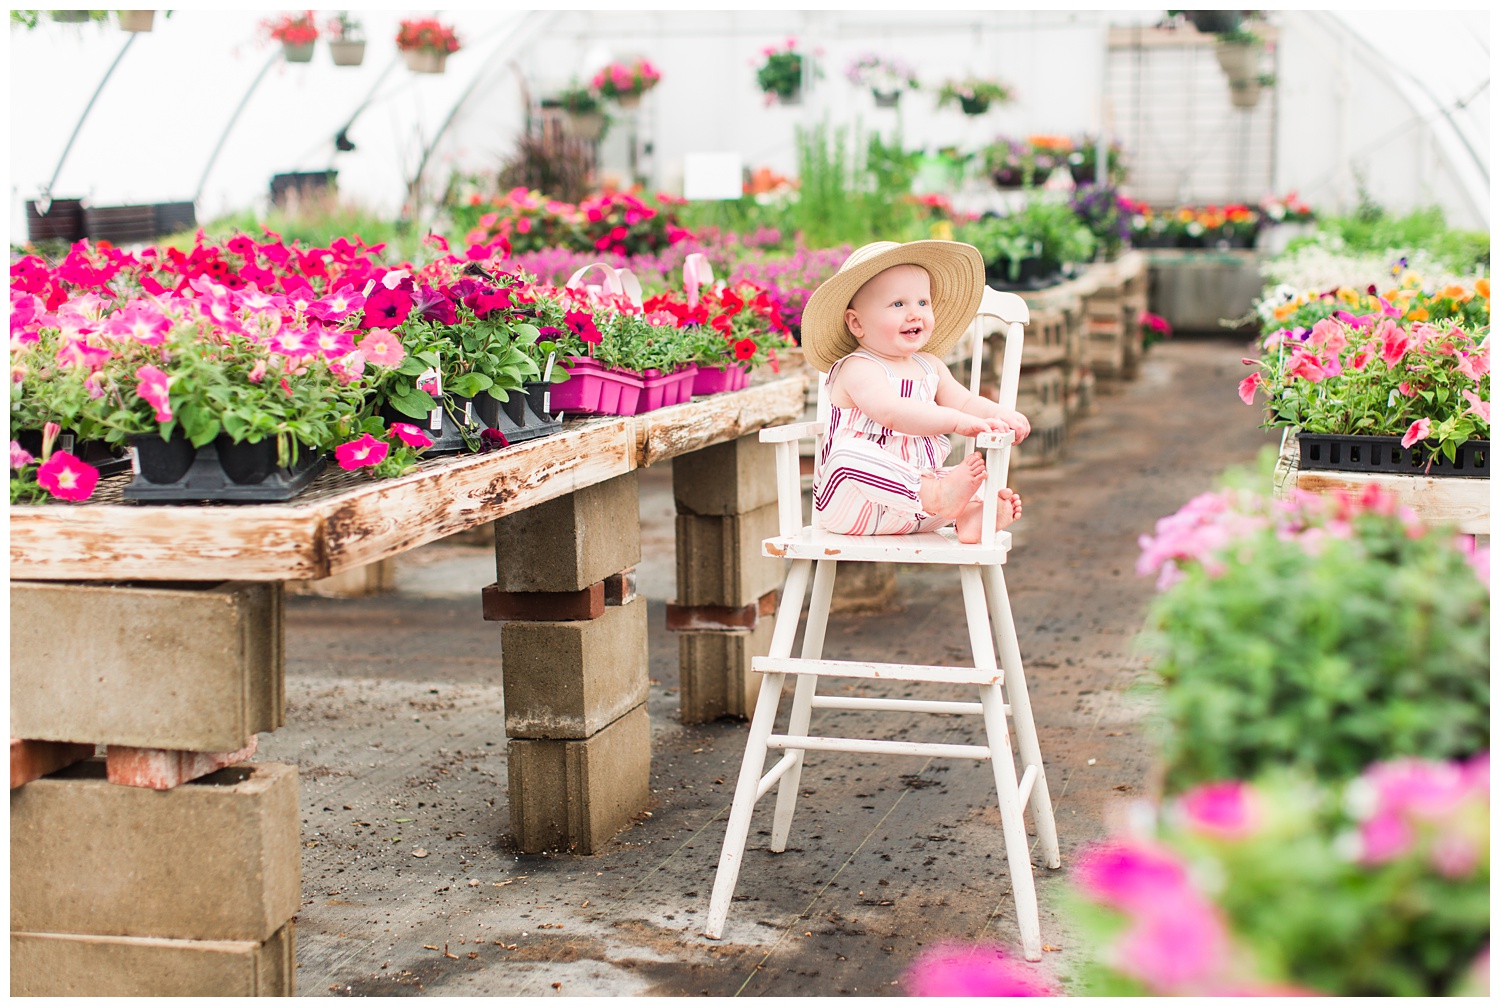 Baby Ivy sitting in a cream antique high chair surrounded by florals in a greenhouse wearing a fun floppy hat.